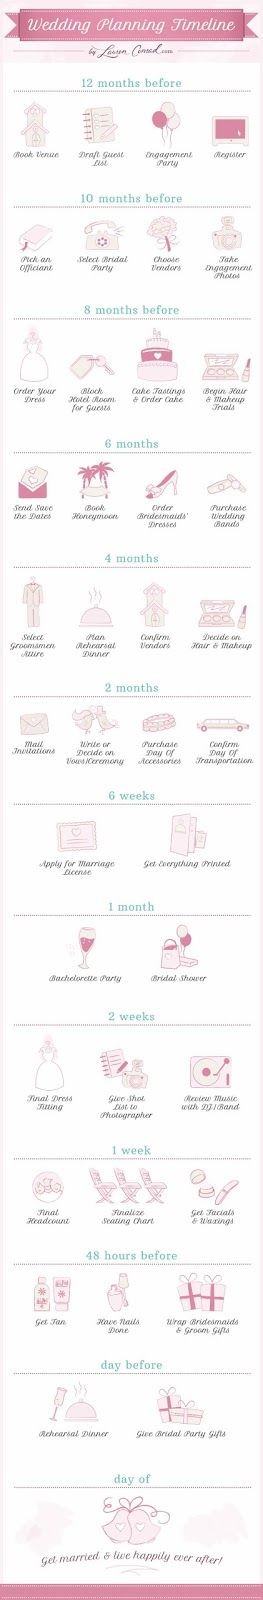 Wedding Timeline.  When you get engaged can determ...